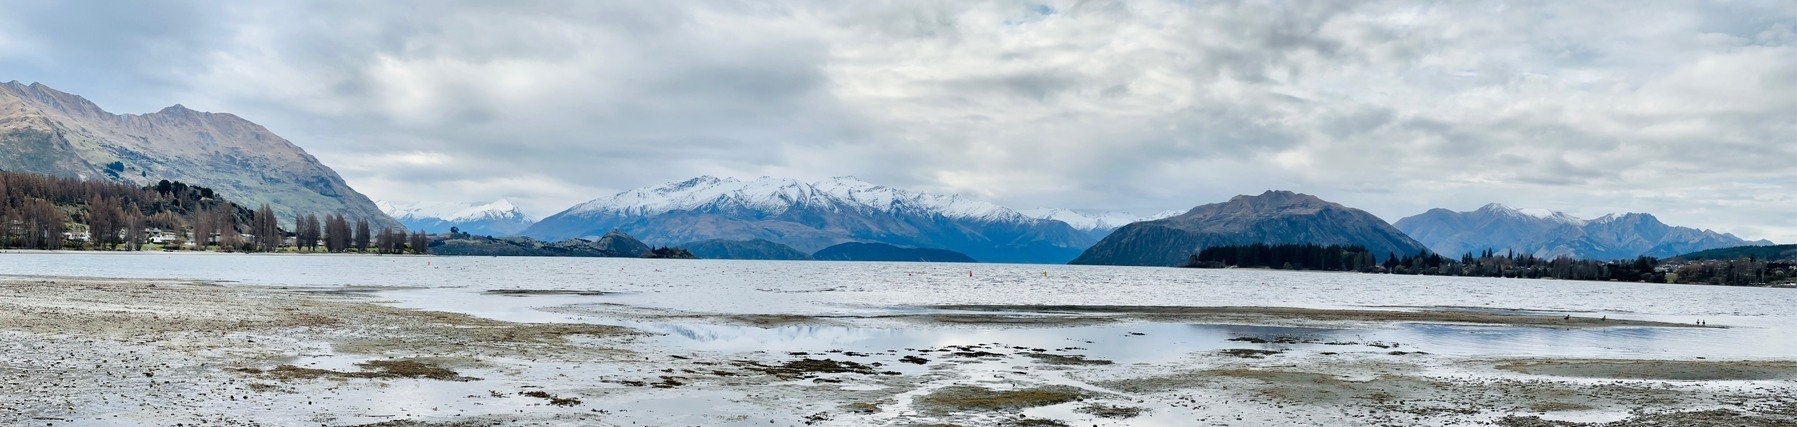 Panorama of Lake Wanaka, New Zealand. Evergreen forest on the lakeshore, snowcapped alpine mountains in the distance.